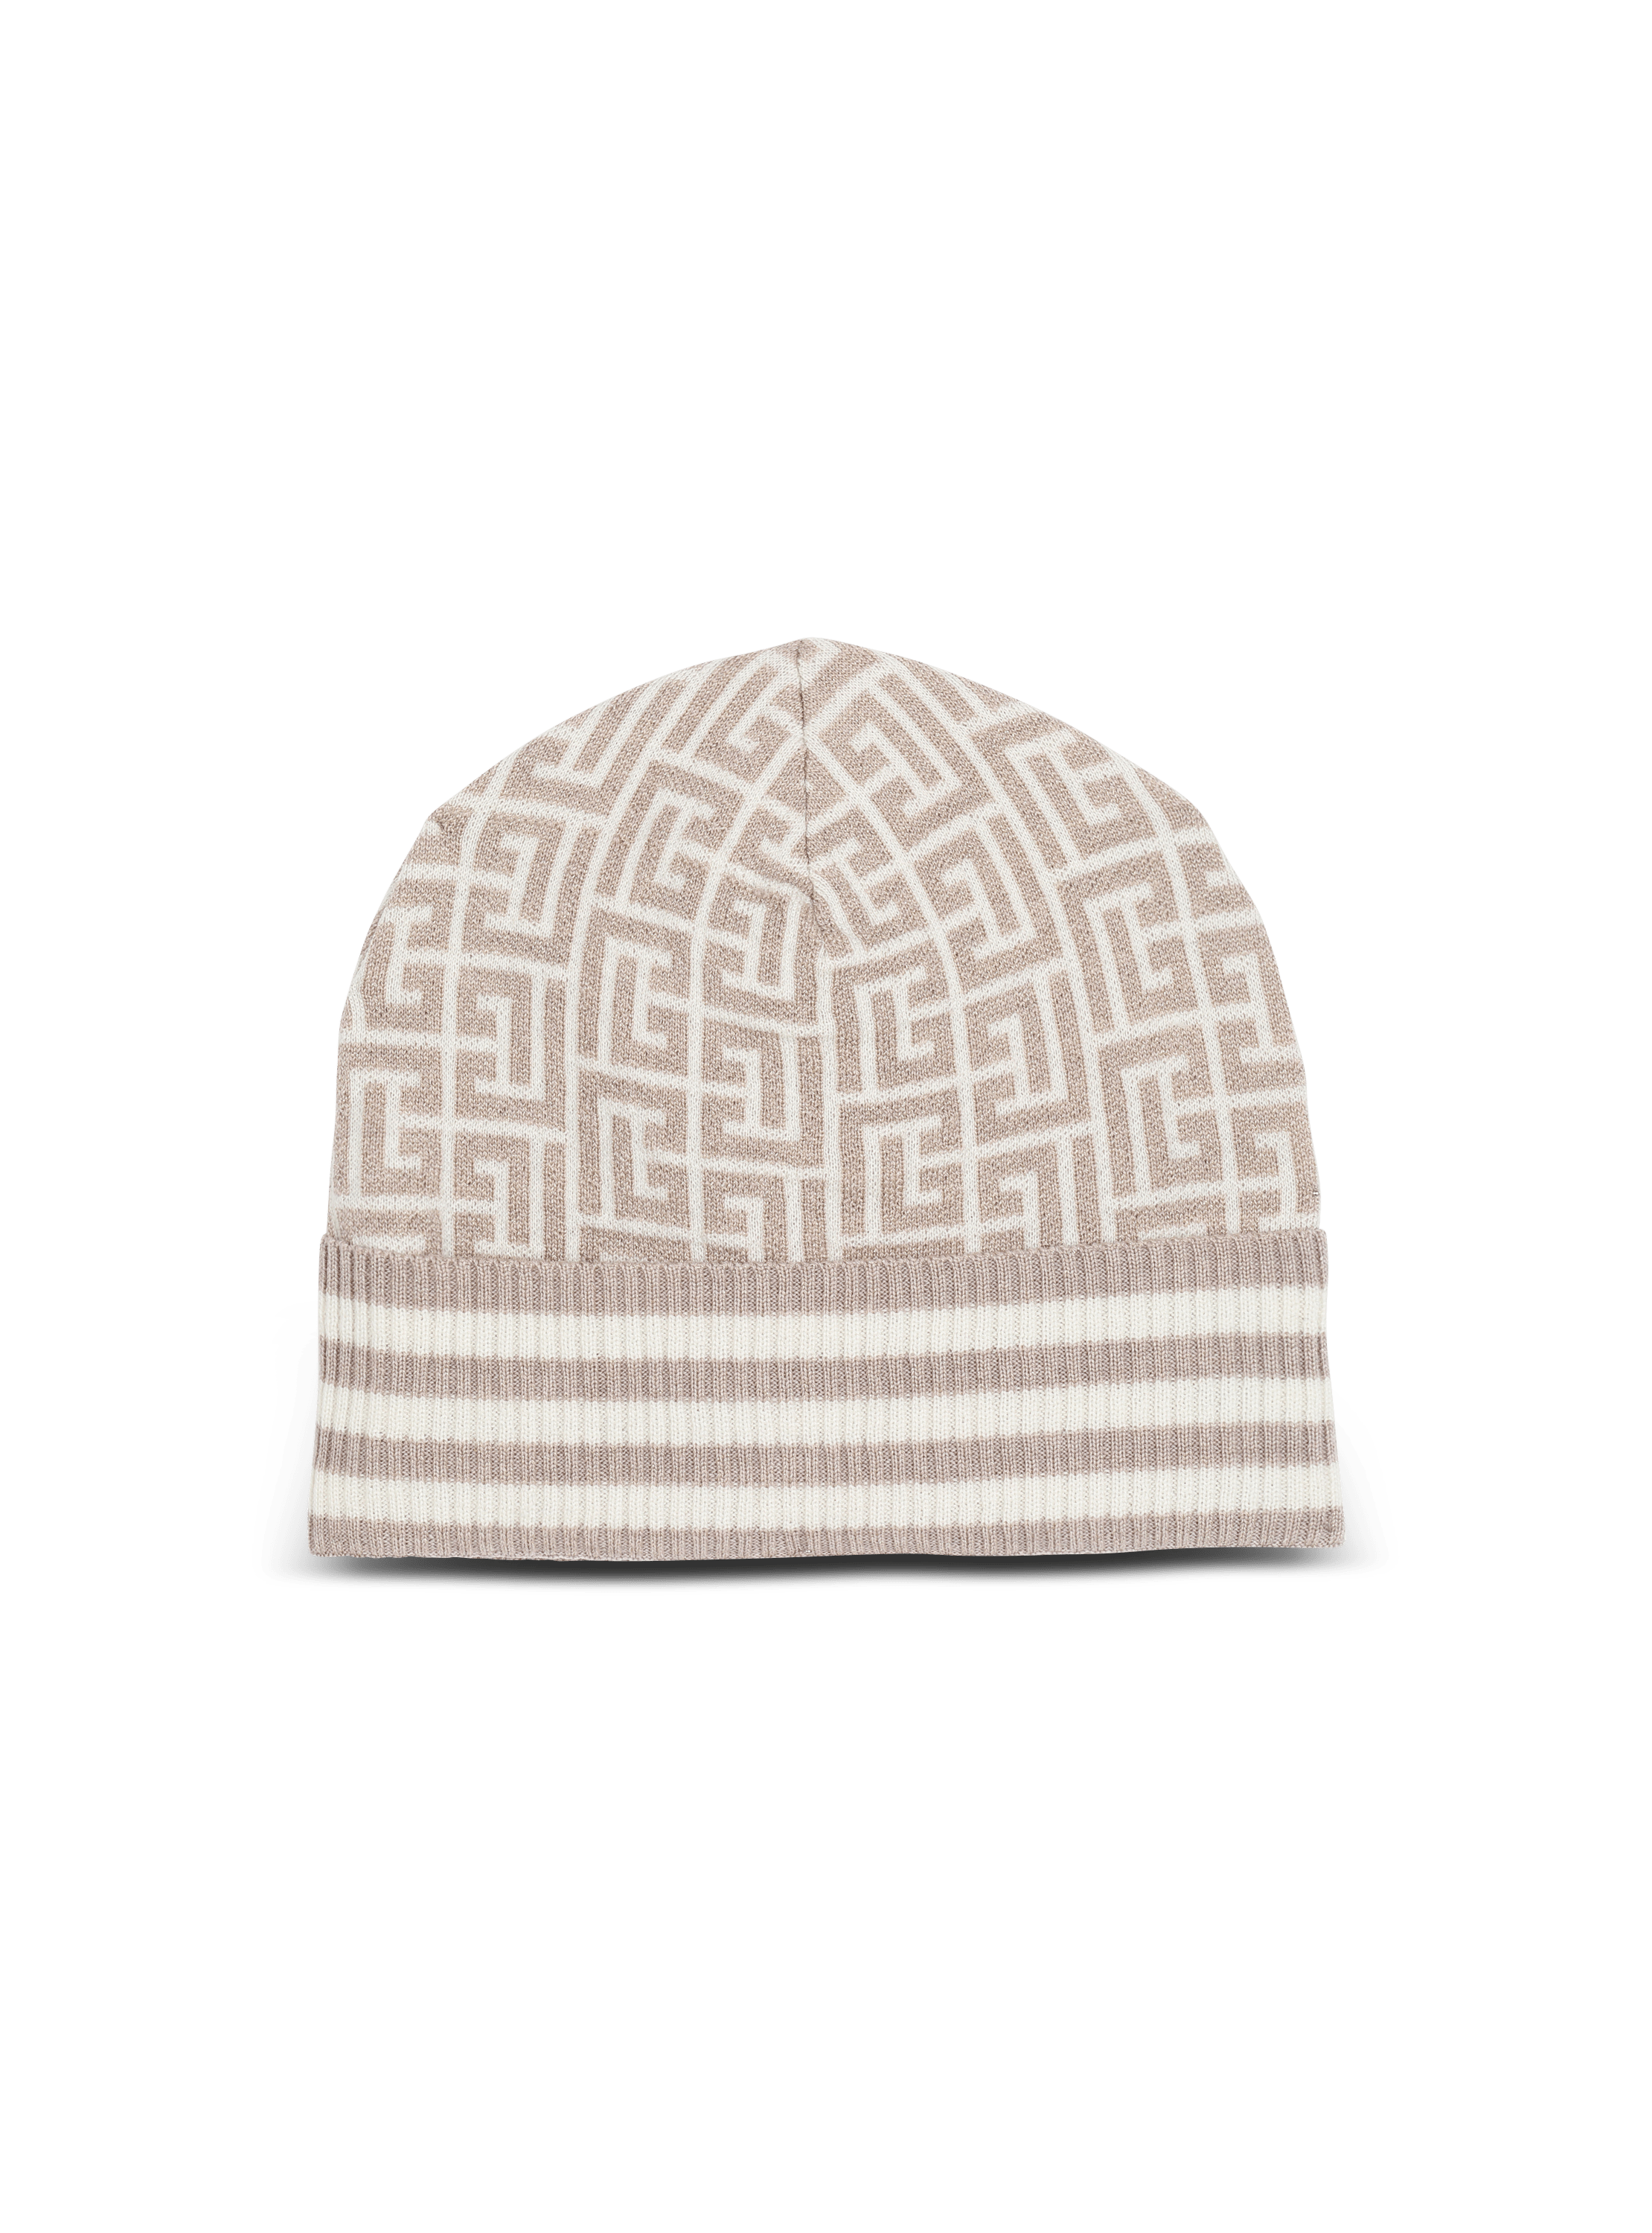 Monogrammed embroidered wool hat